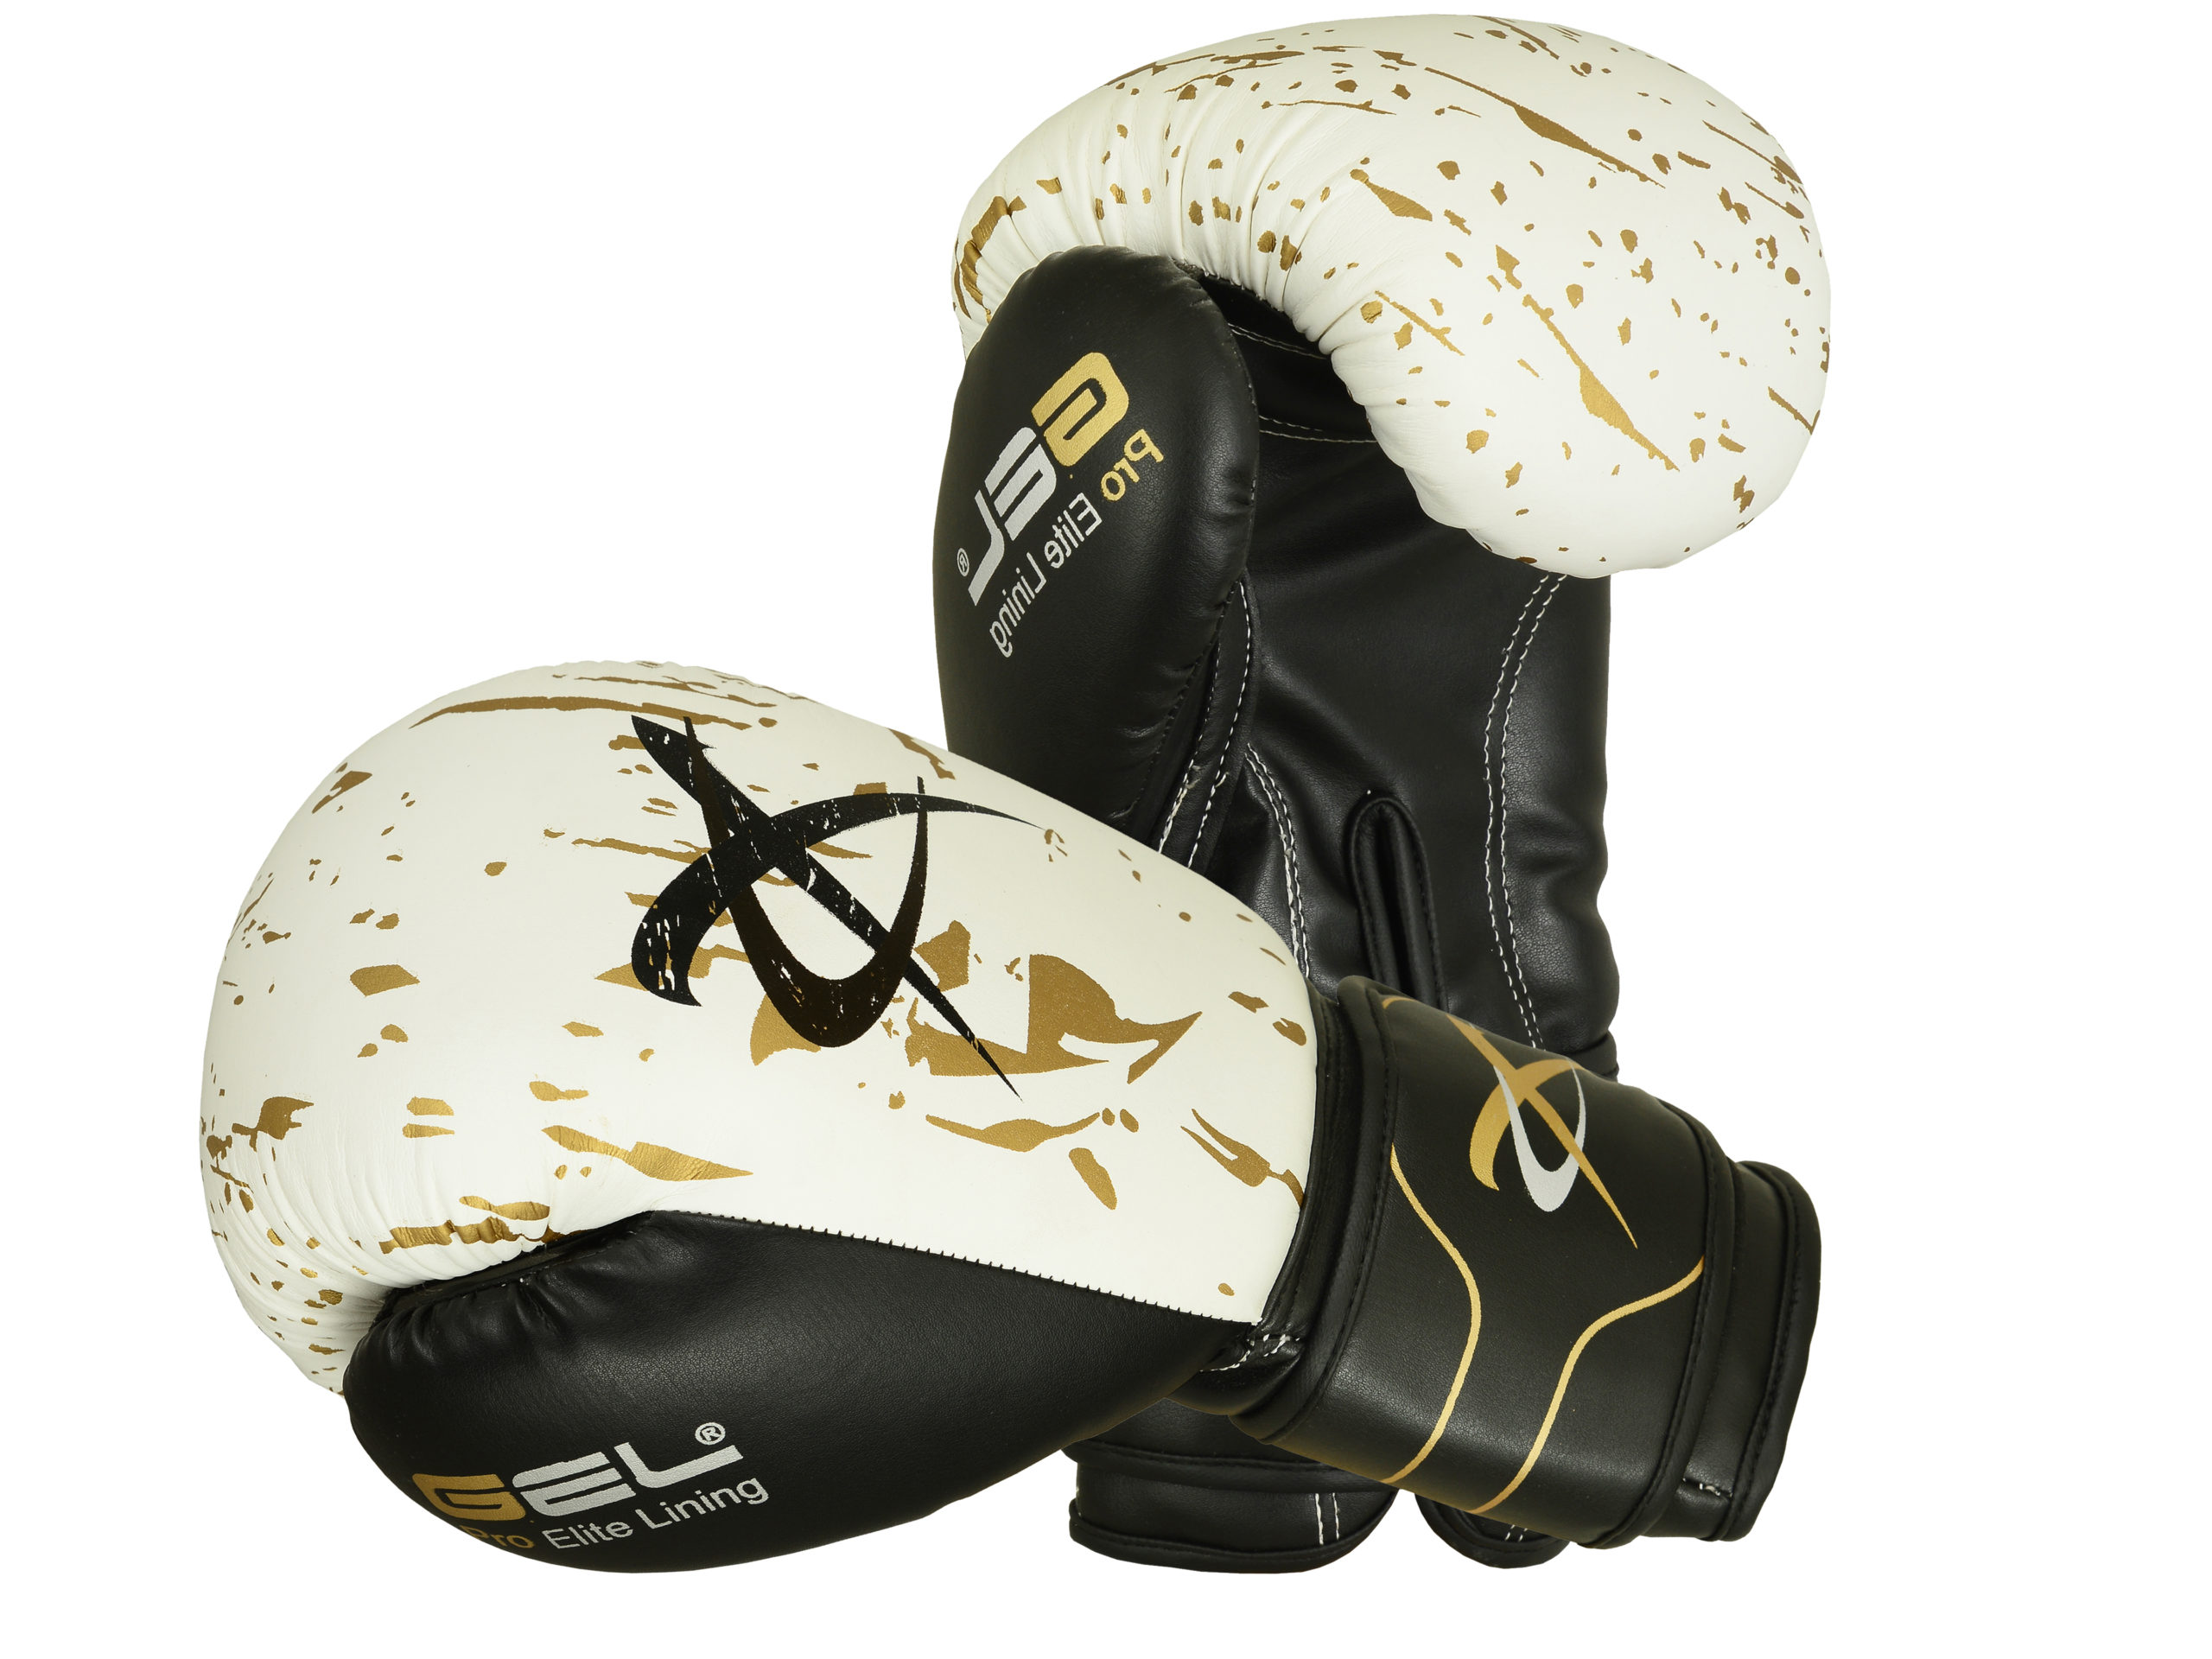 XC Gold Splatter Cow Hide Leather Boxing Gloves